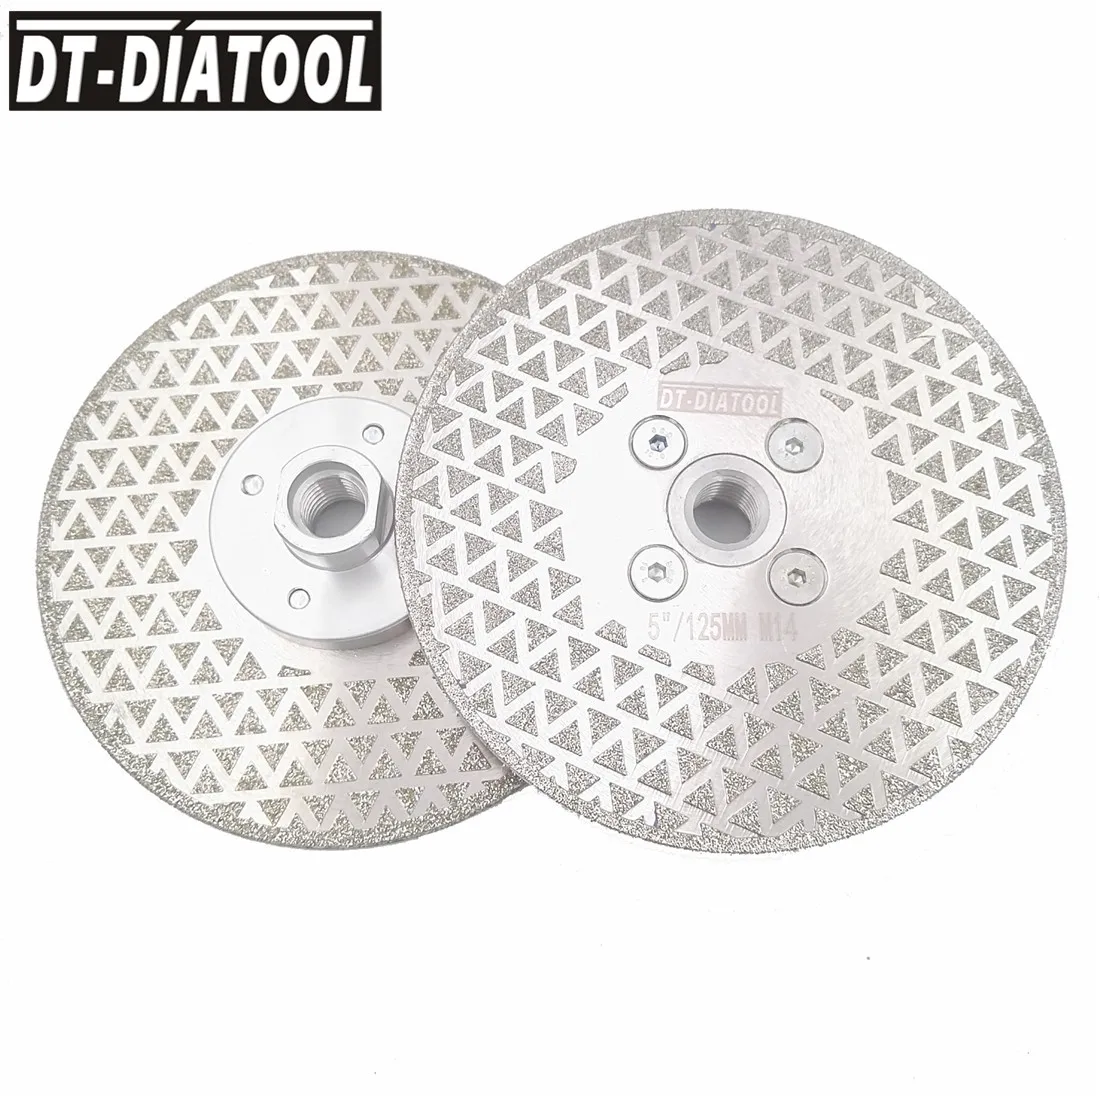 

DT-DIATOOL 2pcs M14 Dia 5"/125mm Electroplated Diamond Cutting Disc Grinding Wheel Double Side Coated Granite Marble Saw Blade